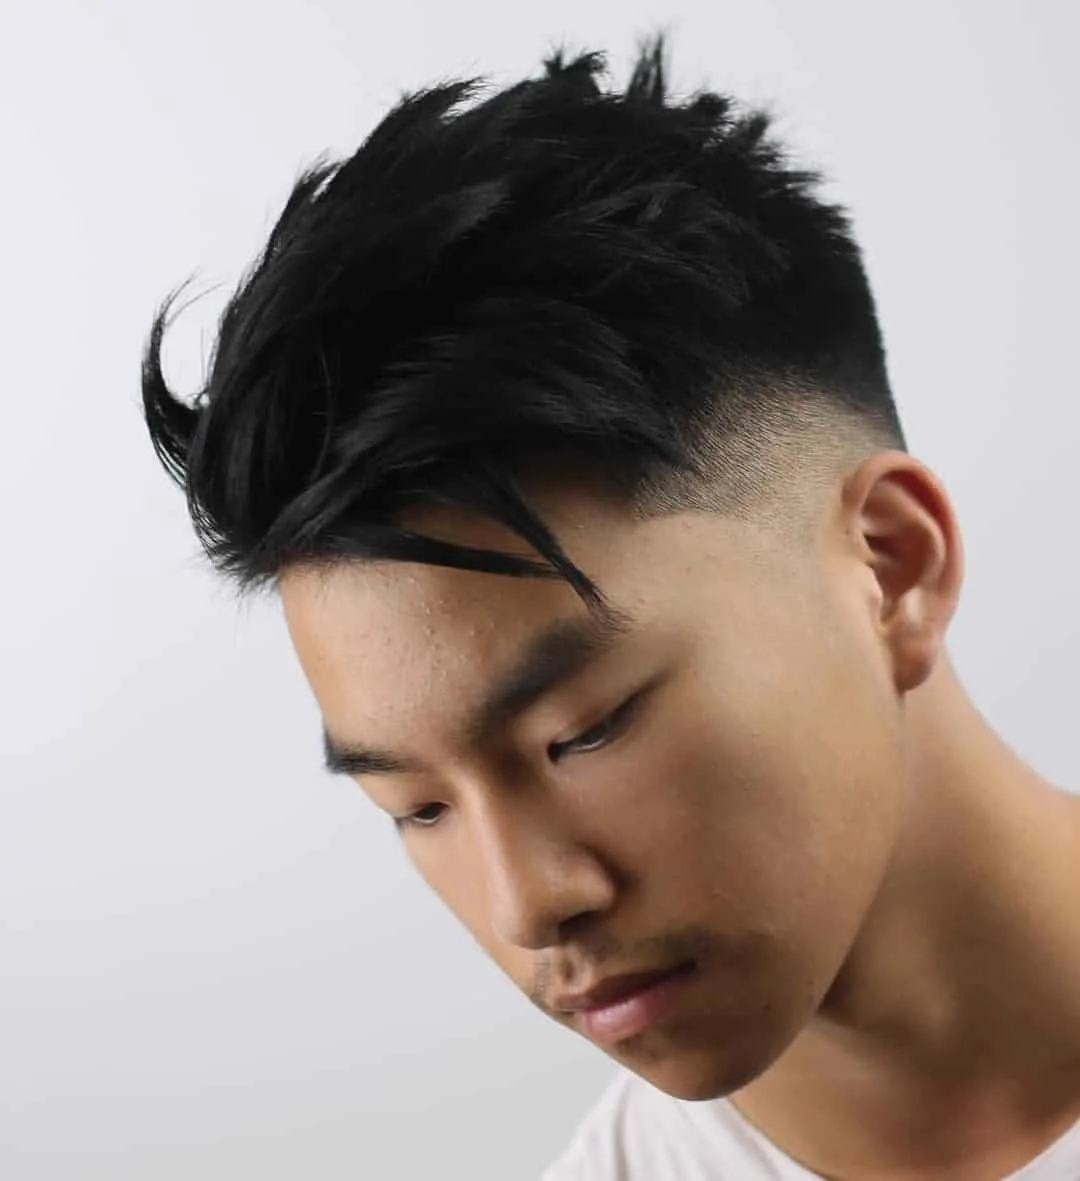 35 Of The Coolest Asian Men Hairstyles To Try – Hottest Haircuts